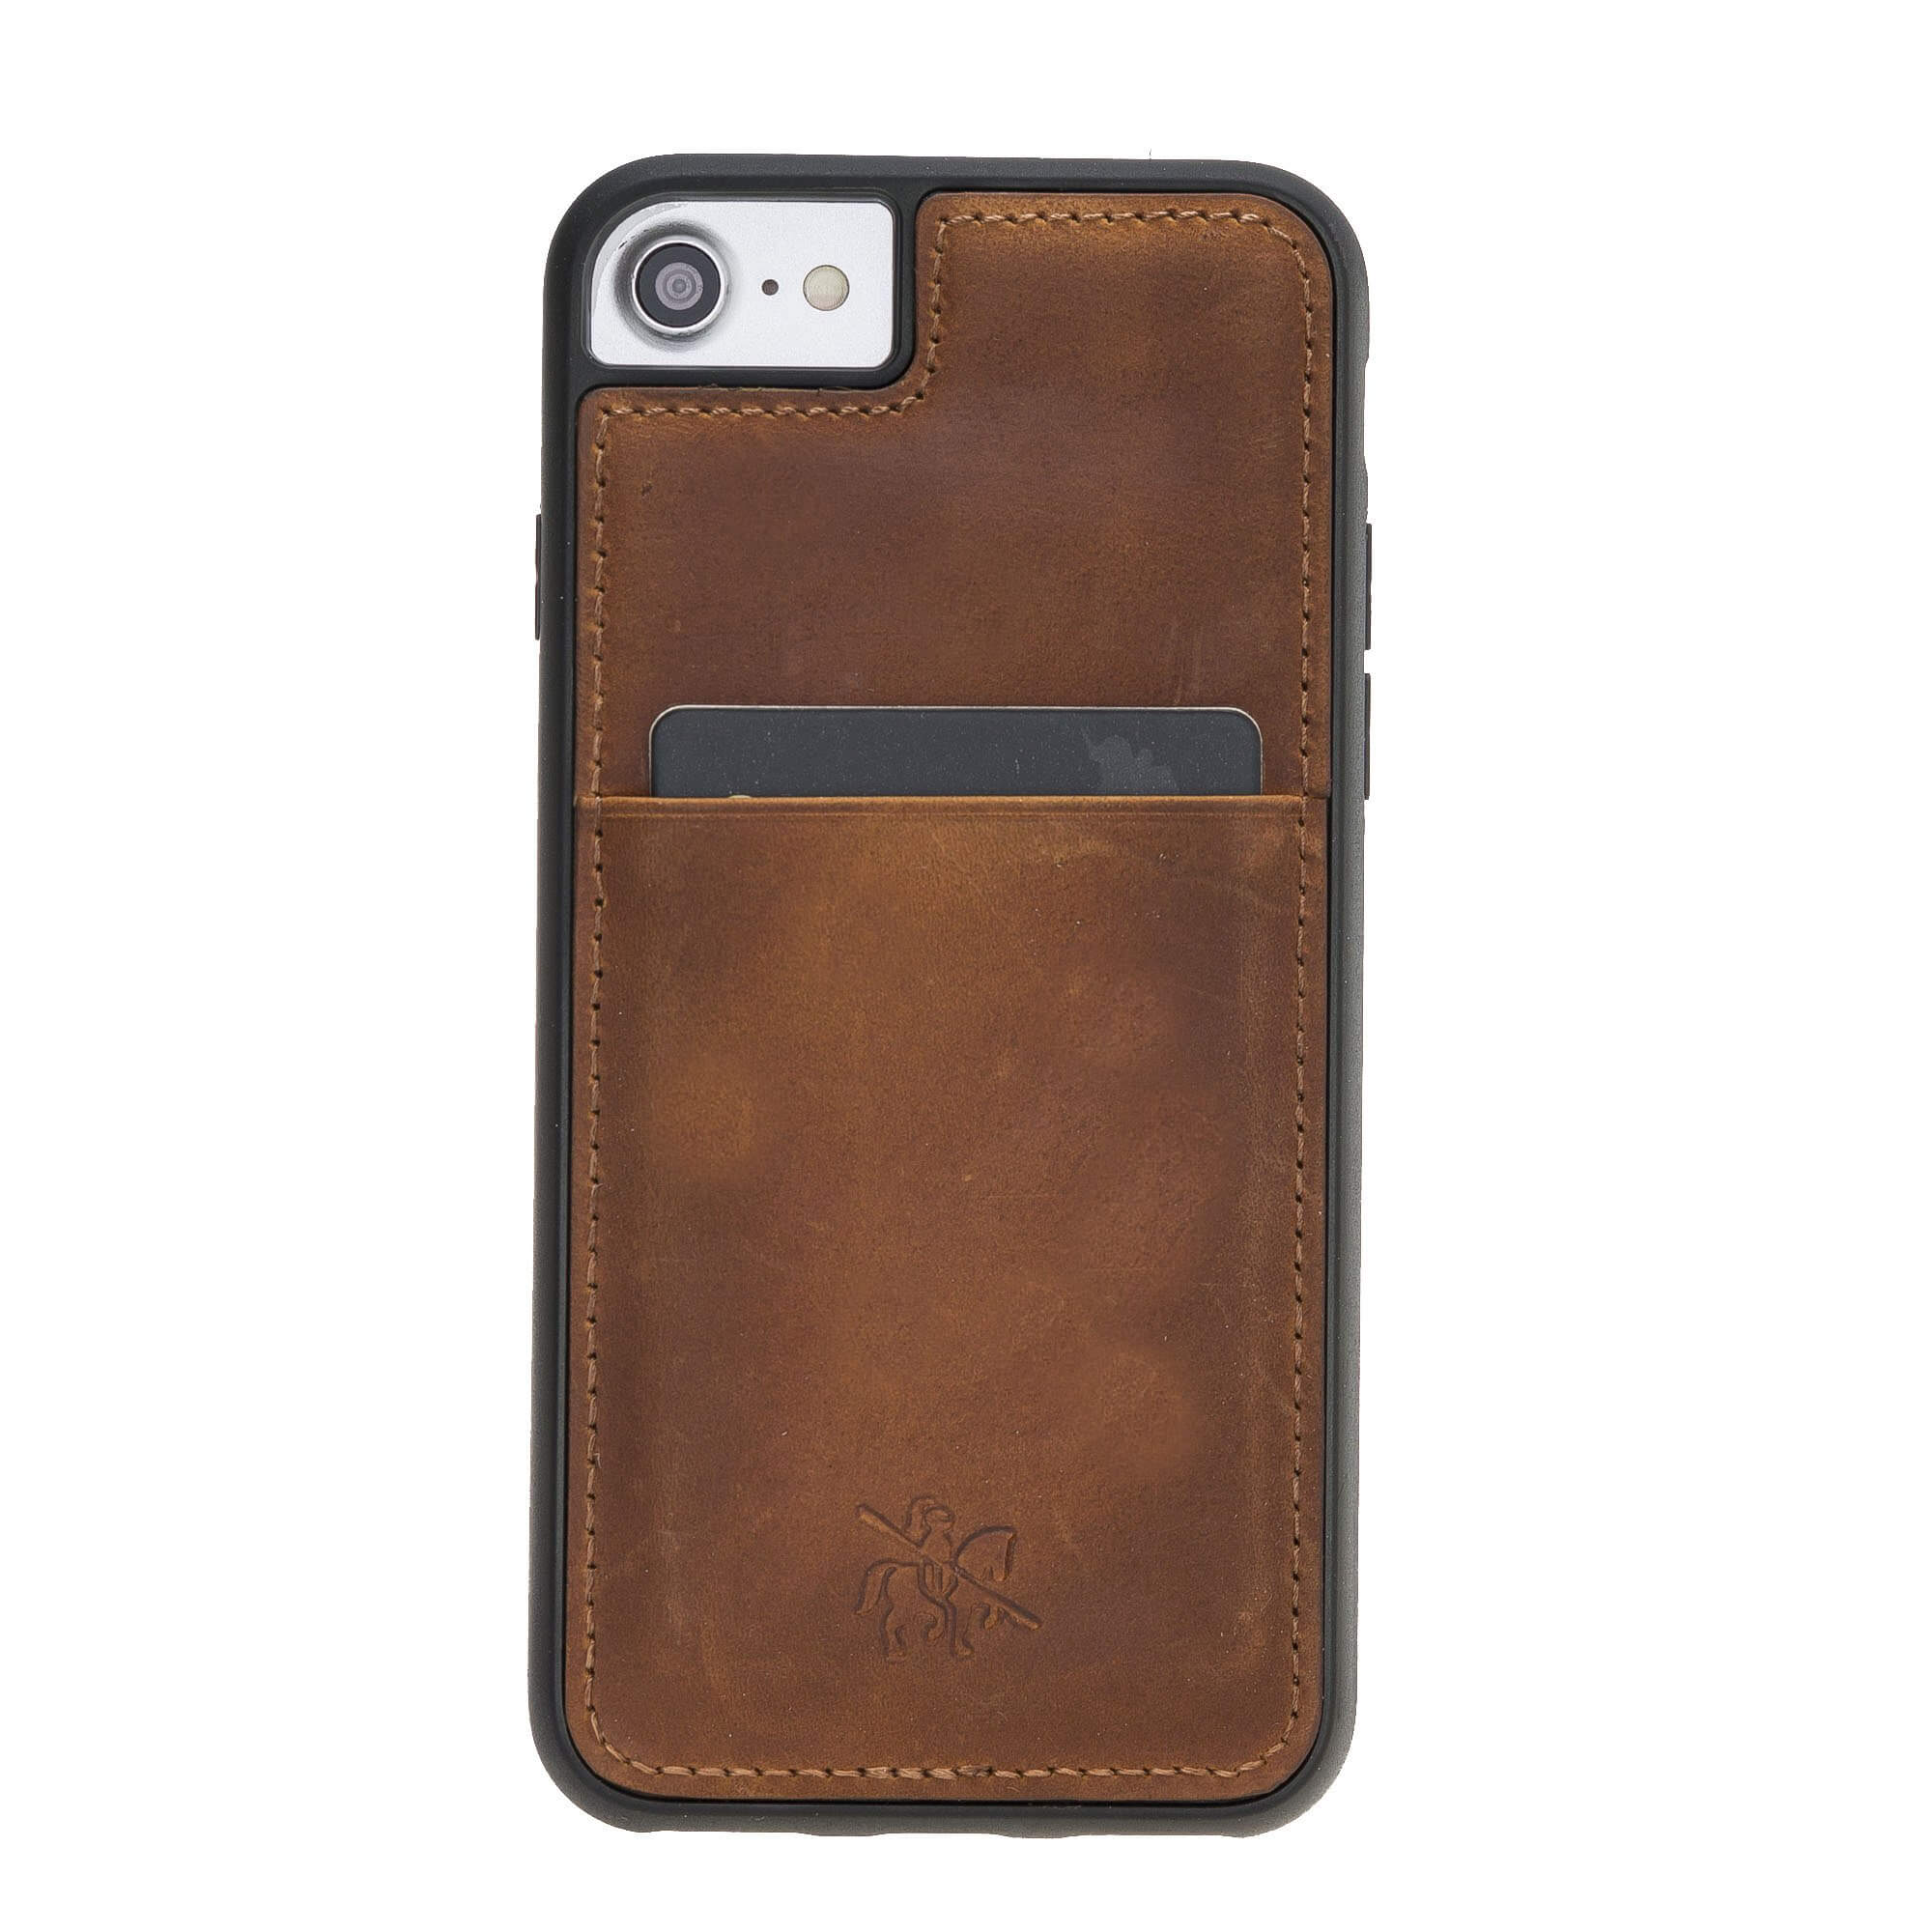 Capri Snap On Leather Wallet Case For Iphone Se Shop Online Venito Leather